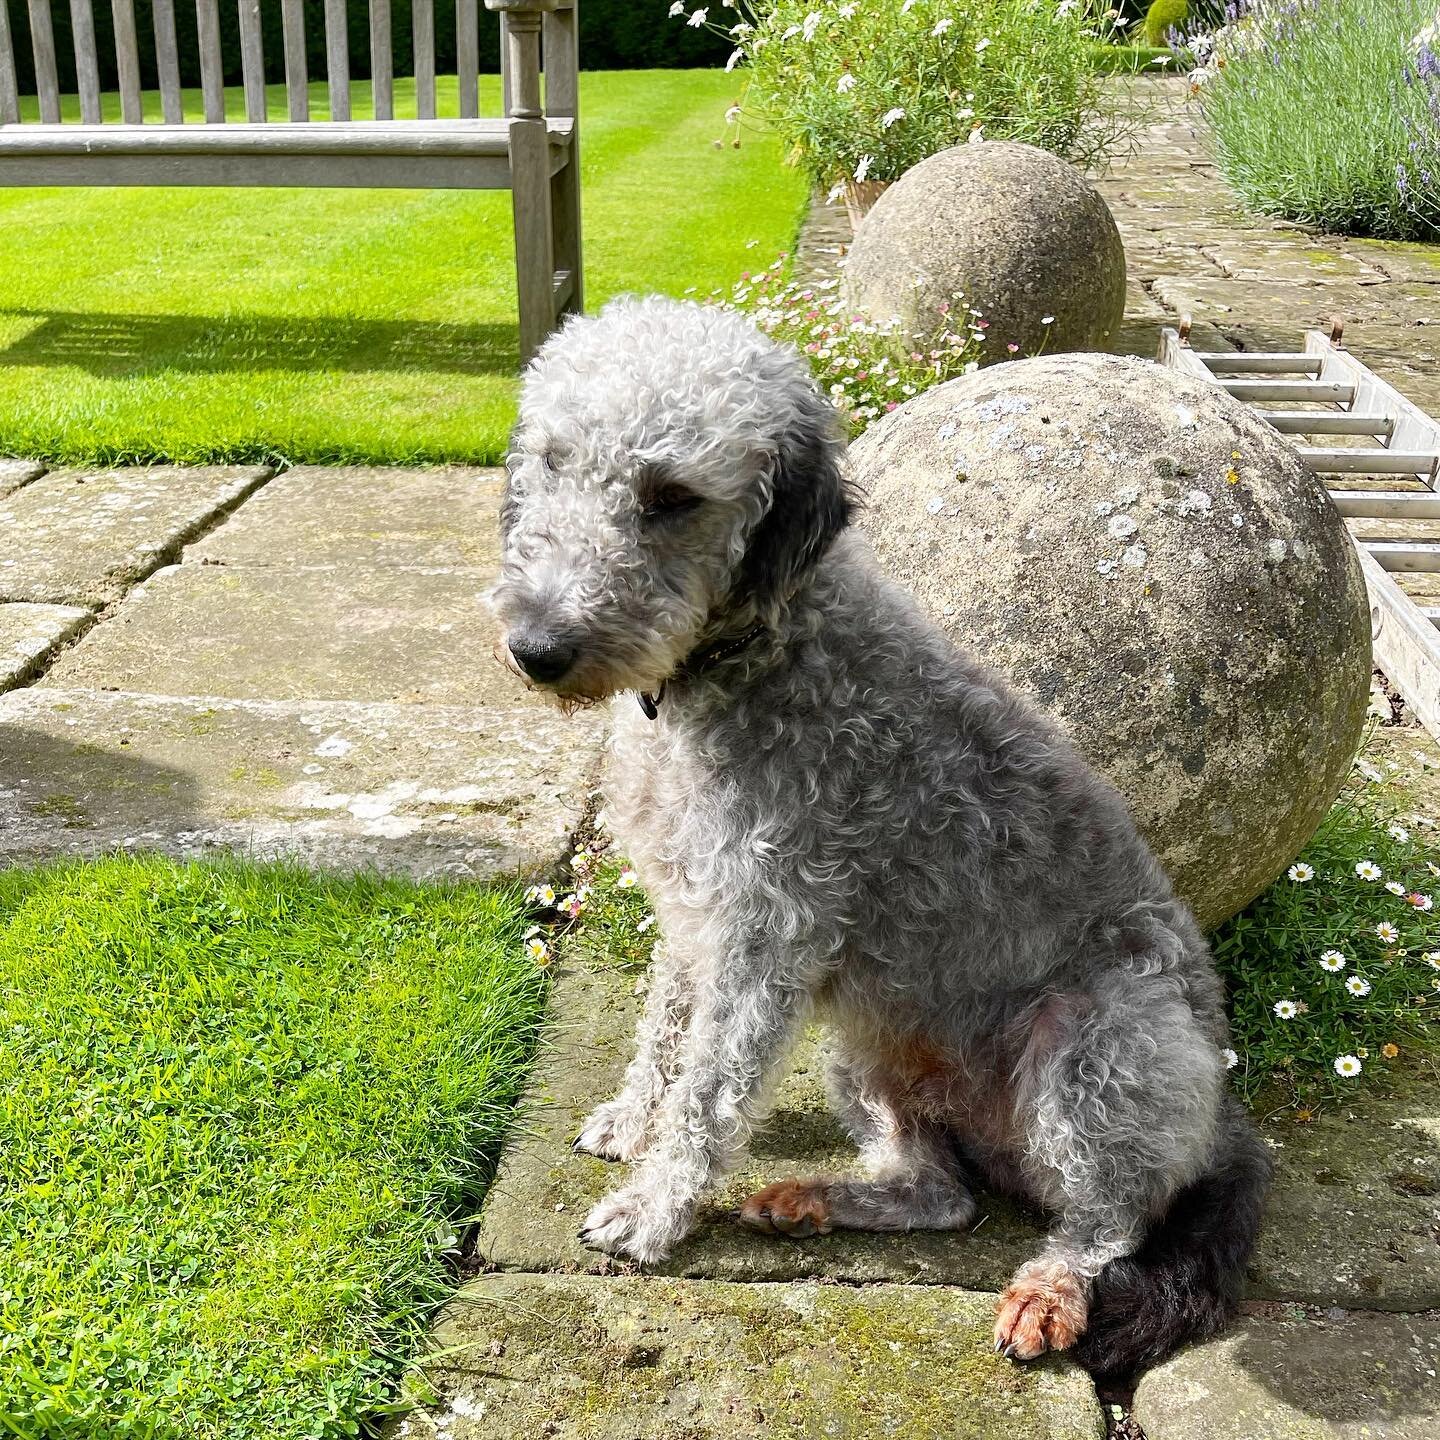 Apparently it&rsquo;s International Dogs Day, so here is our beloved Herbert to say hello 🙌🙋🏼&zwj;♀️🙌
🐾
He&rsquo;s been keeping an eye on me in the garden as I&rsquo;ve been high up the ladder in the pic, pruning and tying in a climbing plant. I